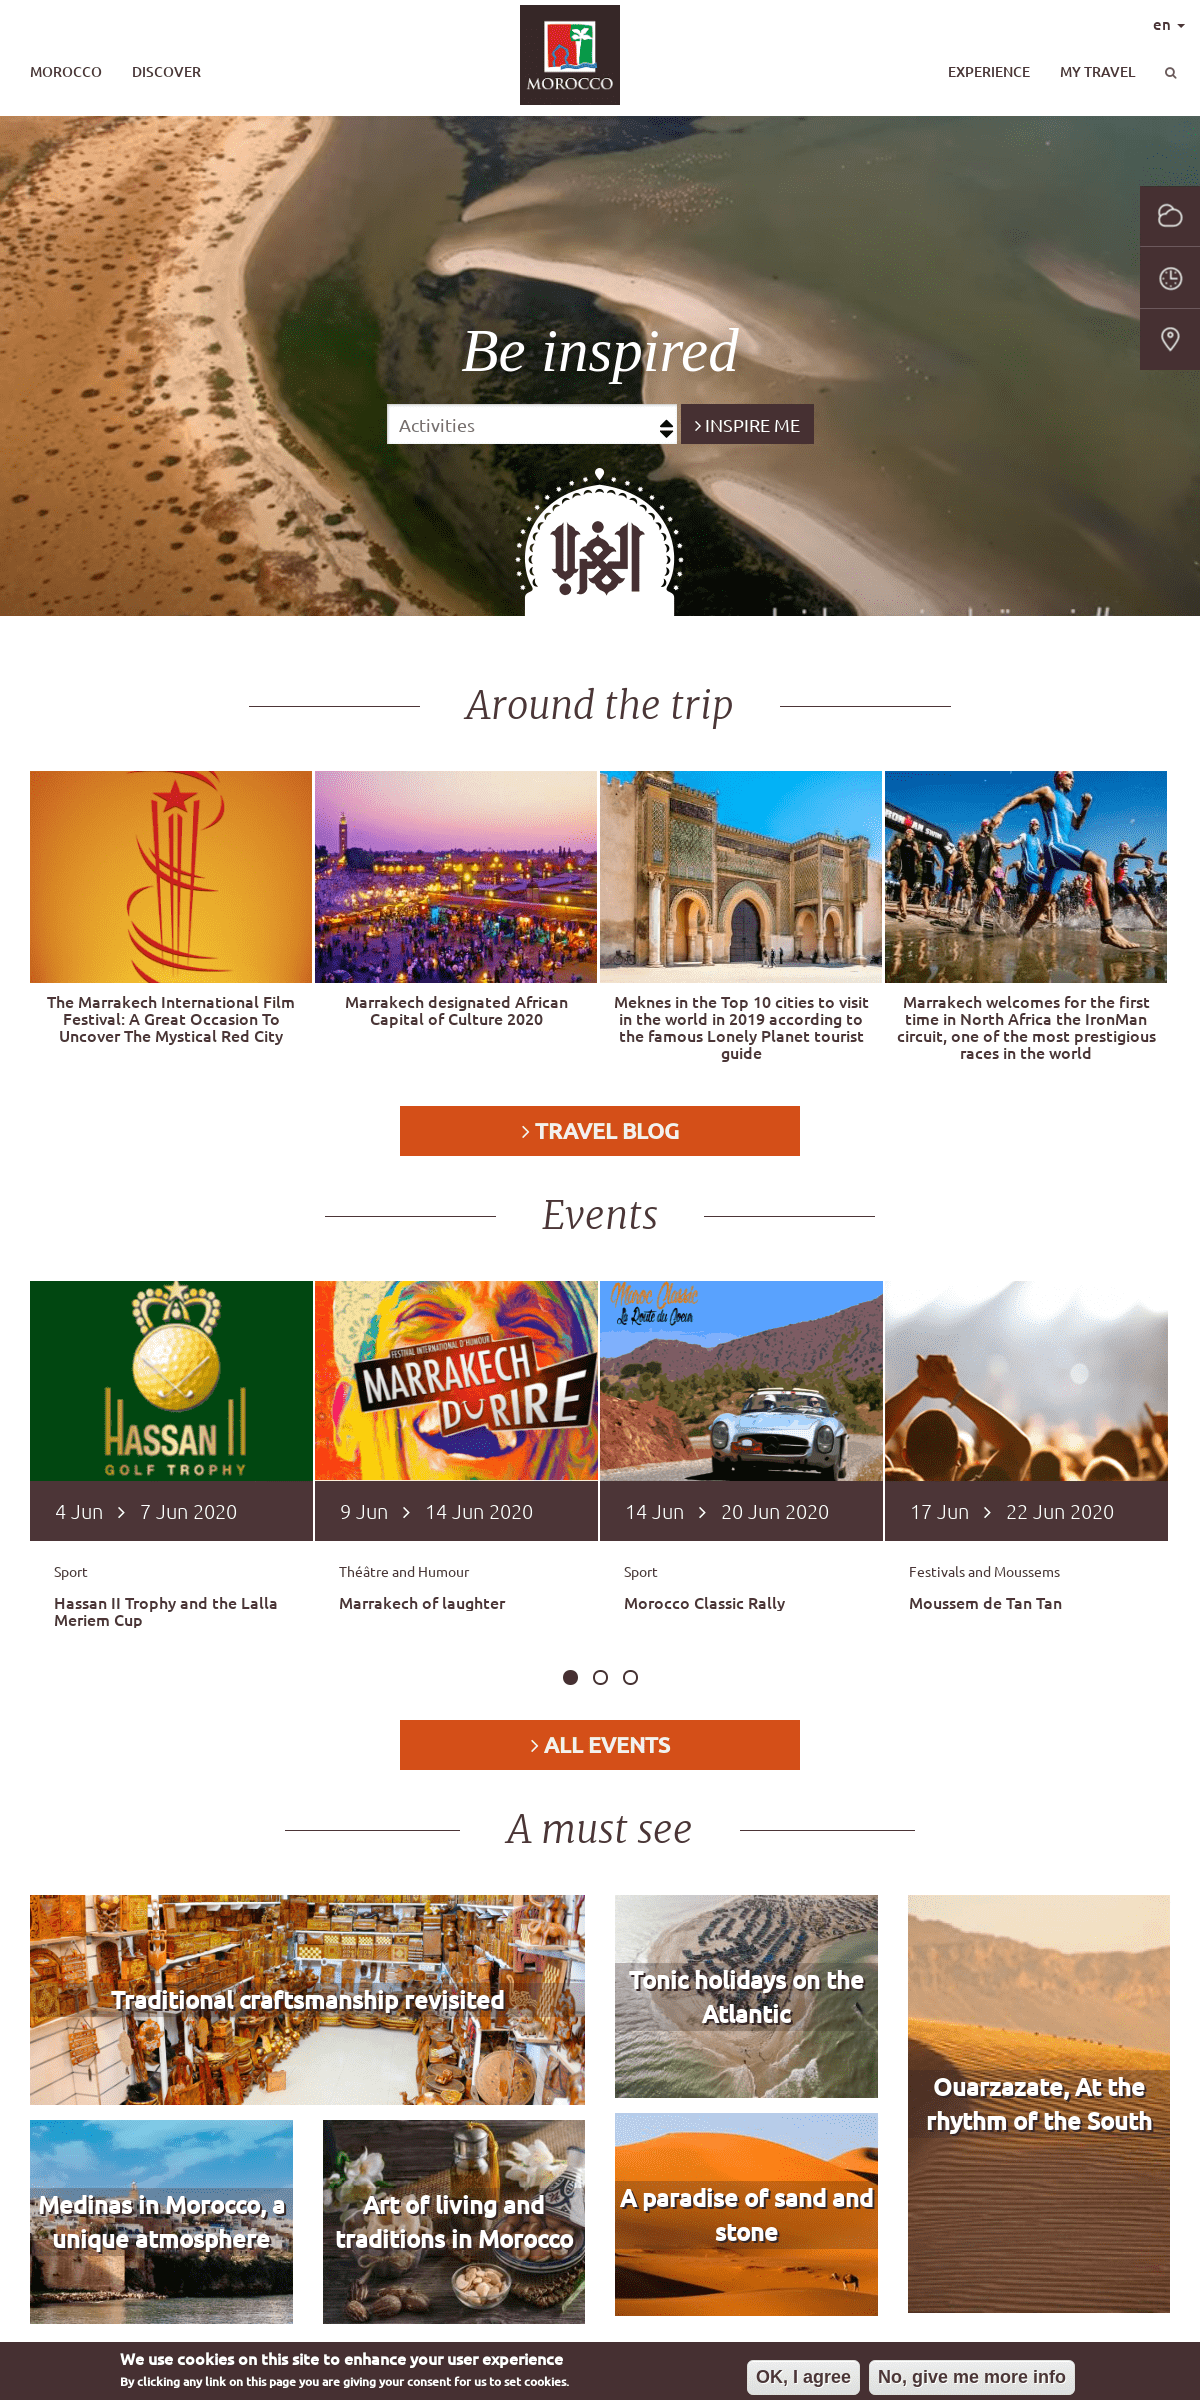 Travel in Morocco - Holidays, Tourism, Travel- Moroccan National Tourist Office